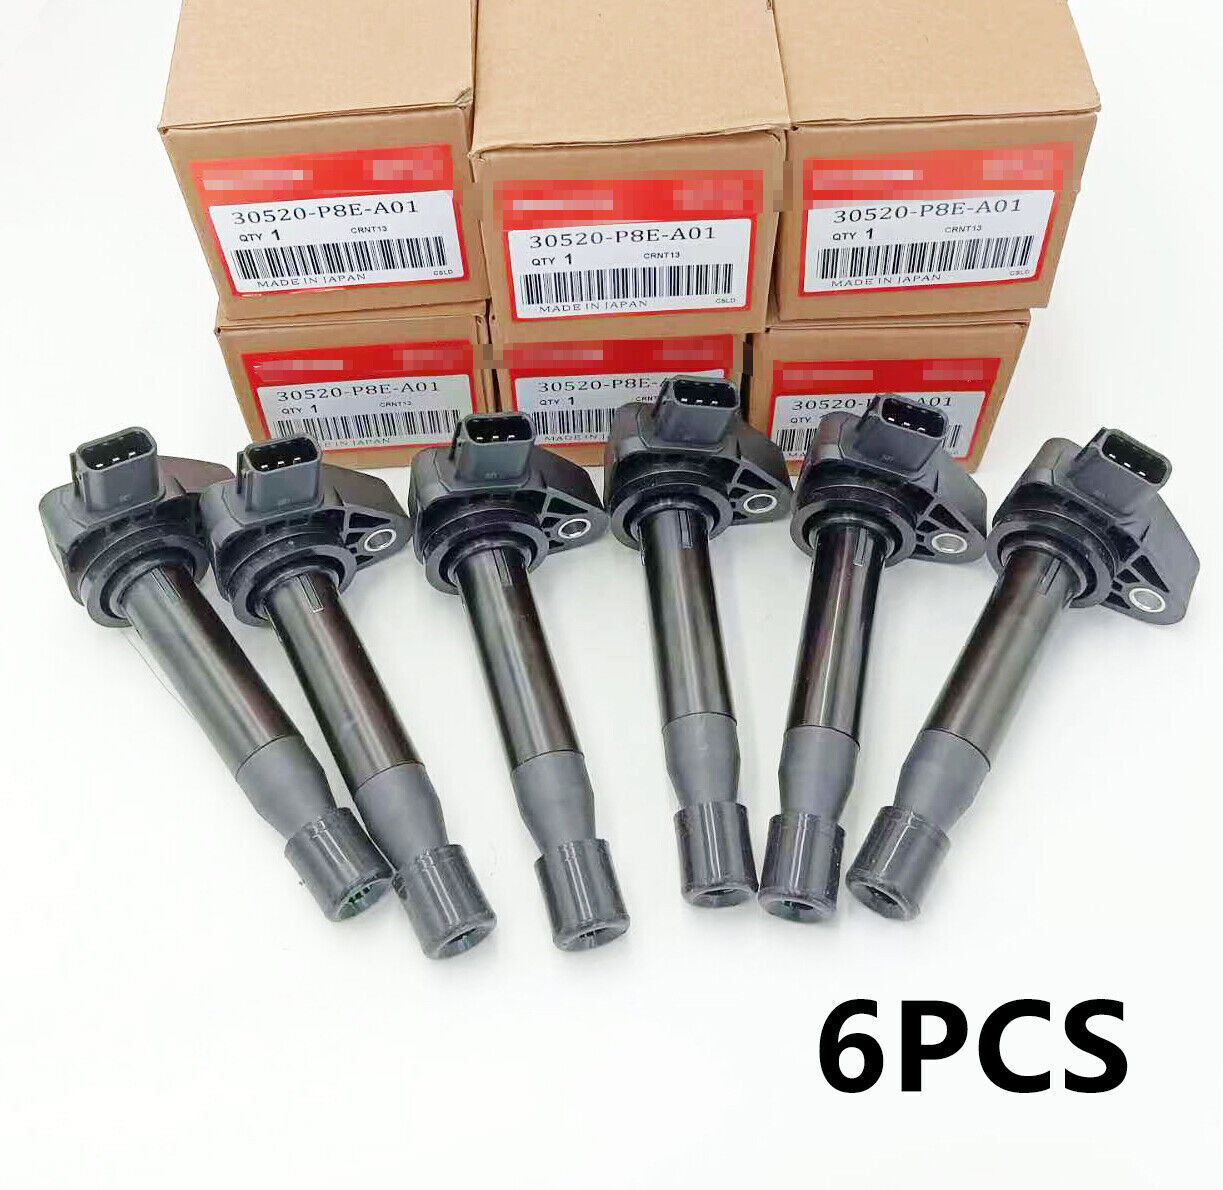 6Pcs Ignition Coils For Accord Odyssey Acura OEM  CL TL 3.0L 30520-P8E-A01 UF400